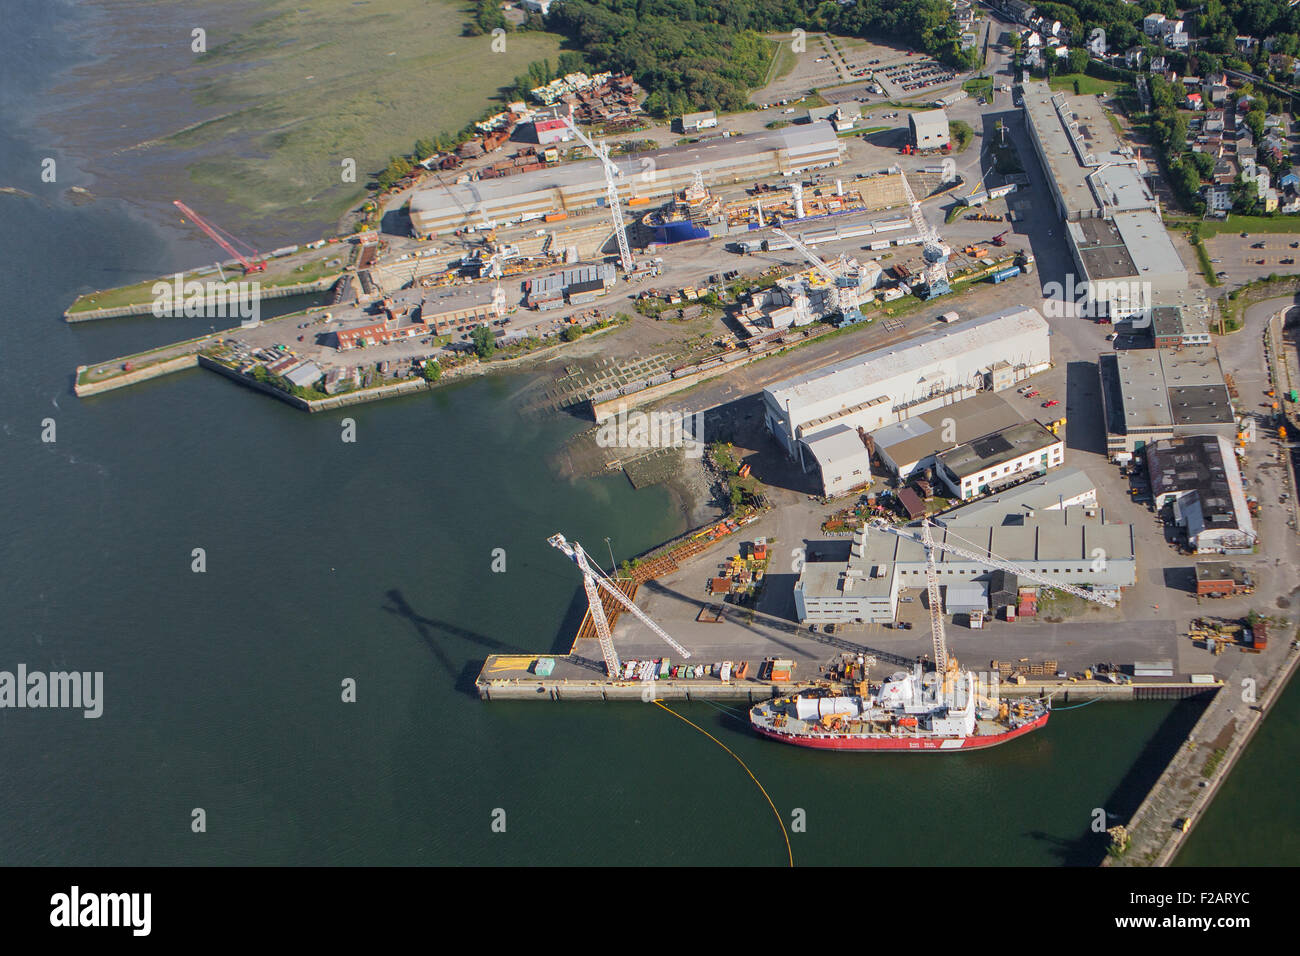 Davie Yards Incorporated, more commonly known as MIL-Davie Shipbuilding, is pictured in this aerial photo in Levis Stock Photo